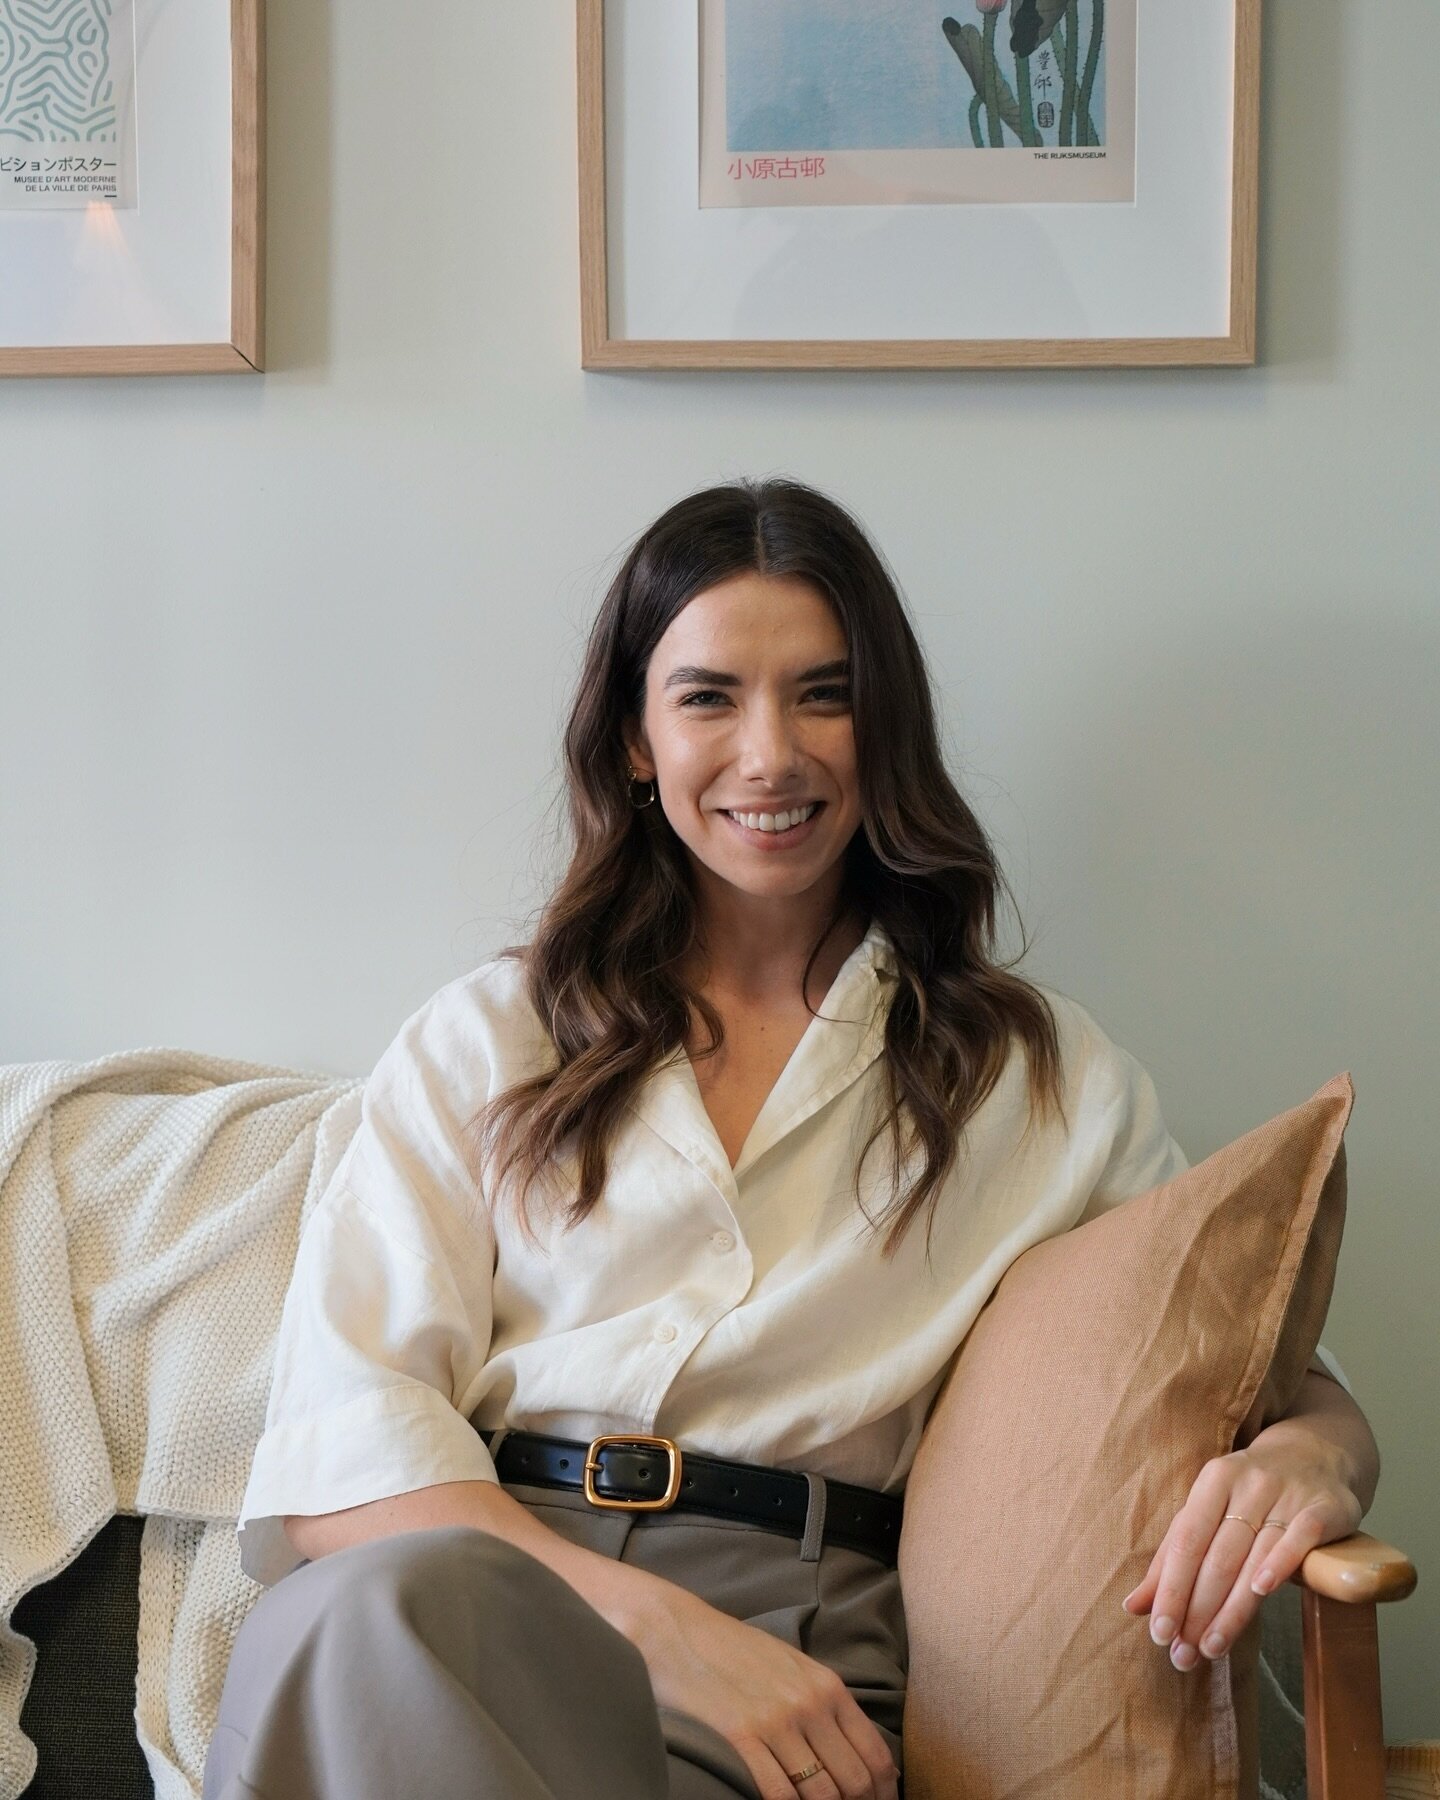 𝙈𝙚𝙚𝙩 𝙮𝙤𝙪𝙧 𝙩𝙚𝙖𝙢 👋🧡

Meet Ally ~ Clinical Psychologist, and the founder of homebase therapy collective. 
After setting out on the solo private practice in 2023 and starting @congruencepsychology, Ally wanted to reduce the barriers for oth